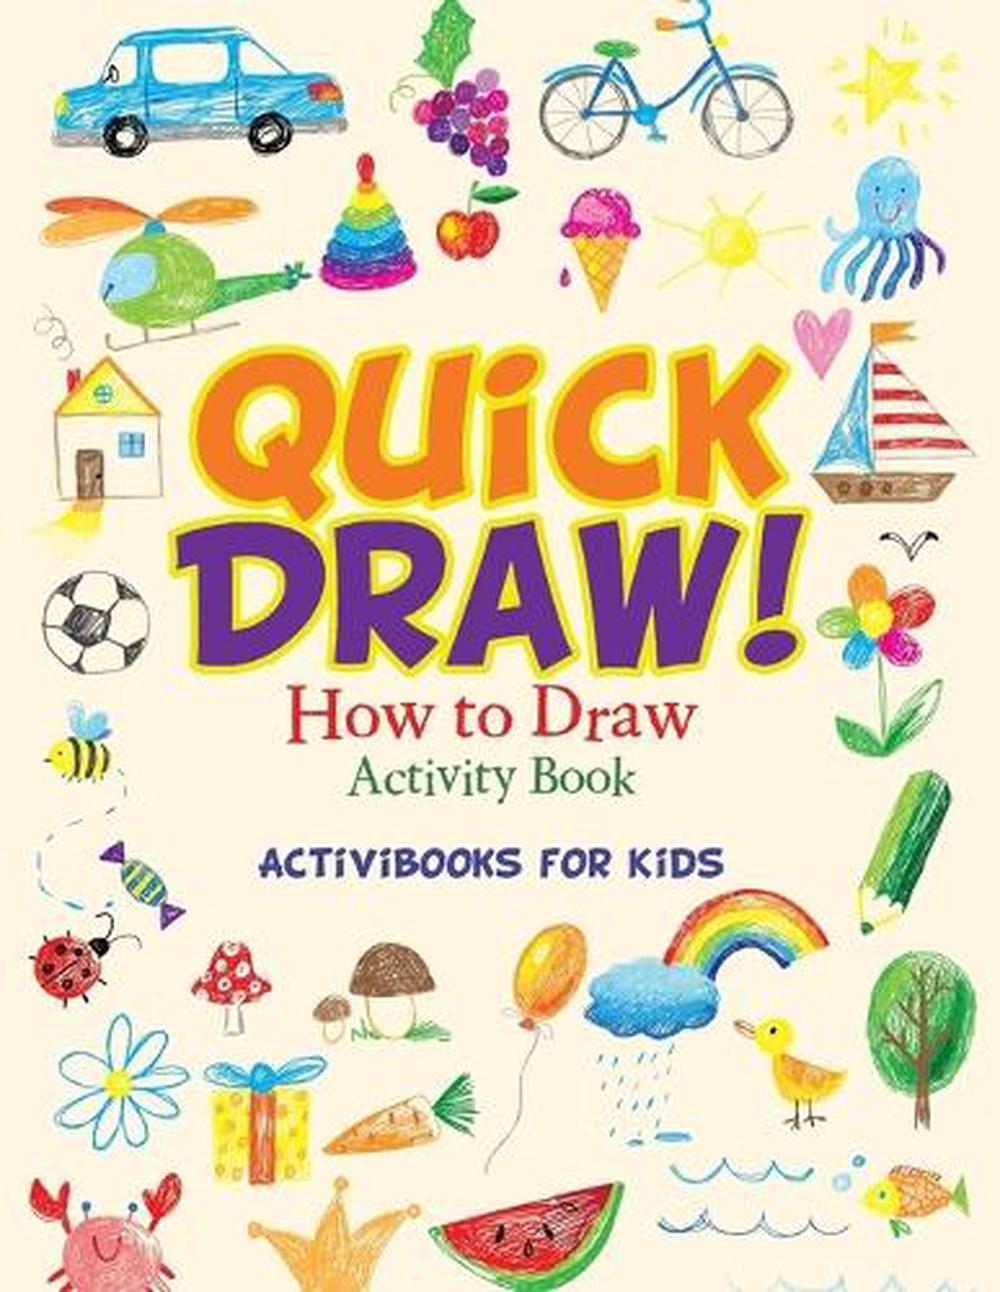 Quick Draw: How to Draw Activity Book by Activibooks For Kids (English ...